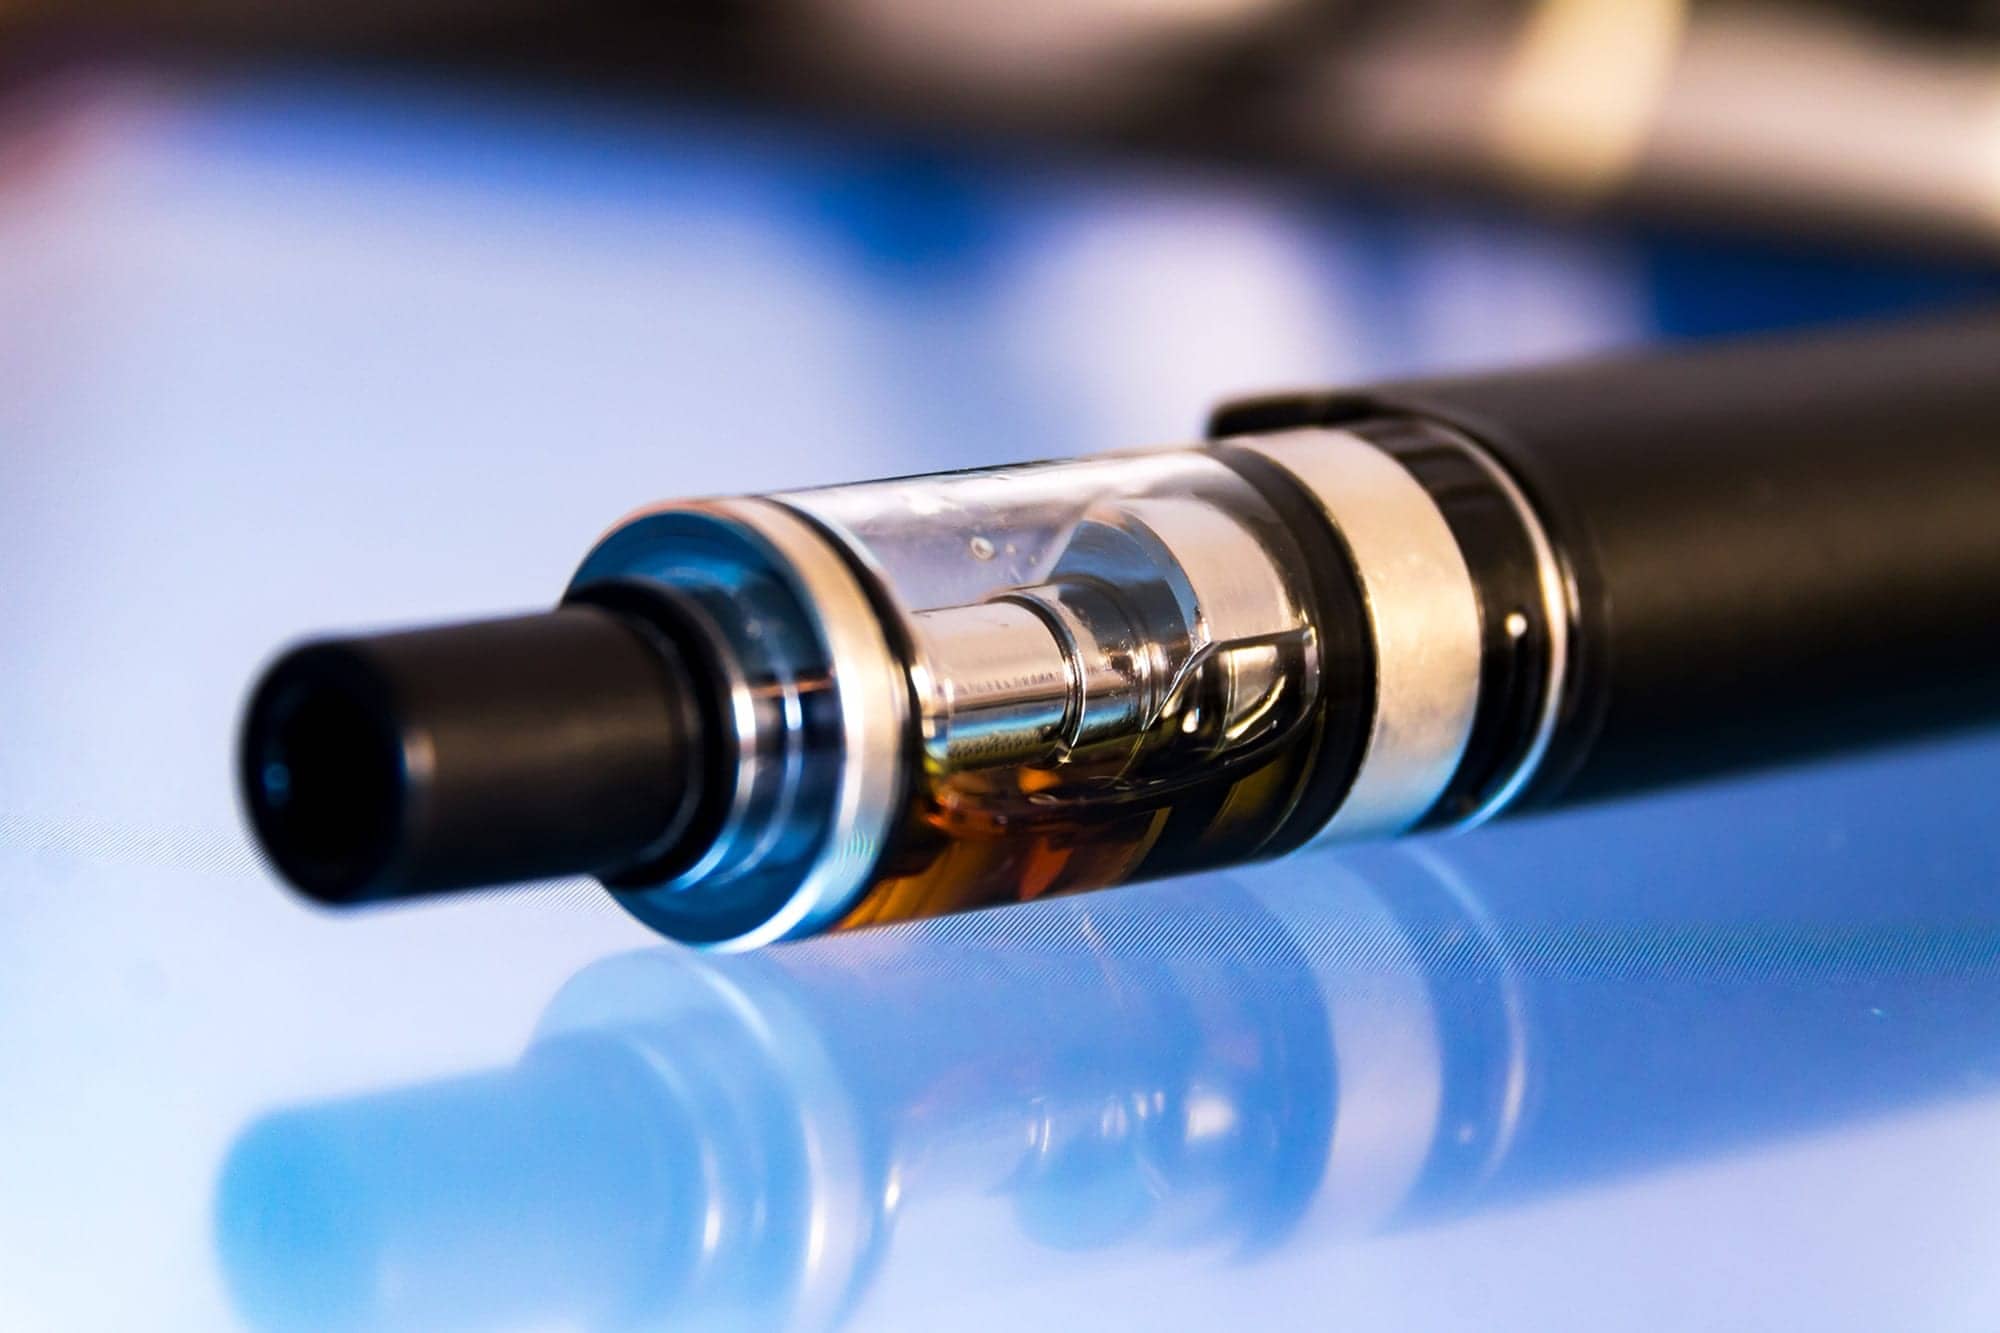 COVID-19 and Vaping: Symptoms More Frequent in E-cigarette Users